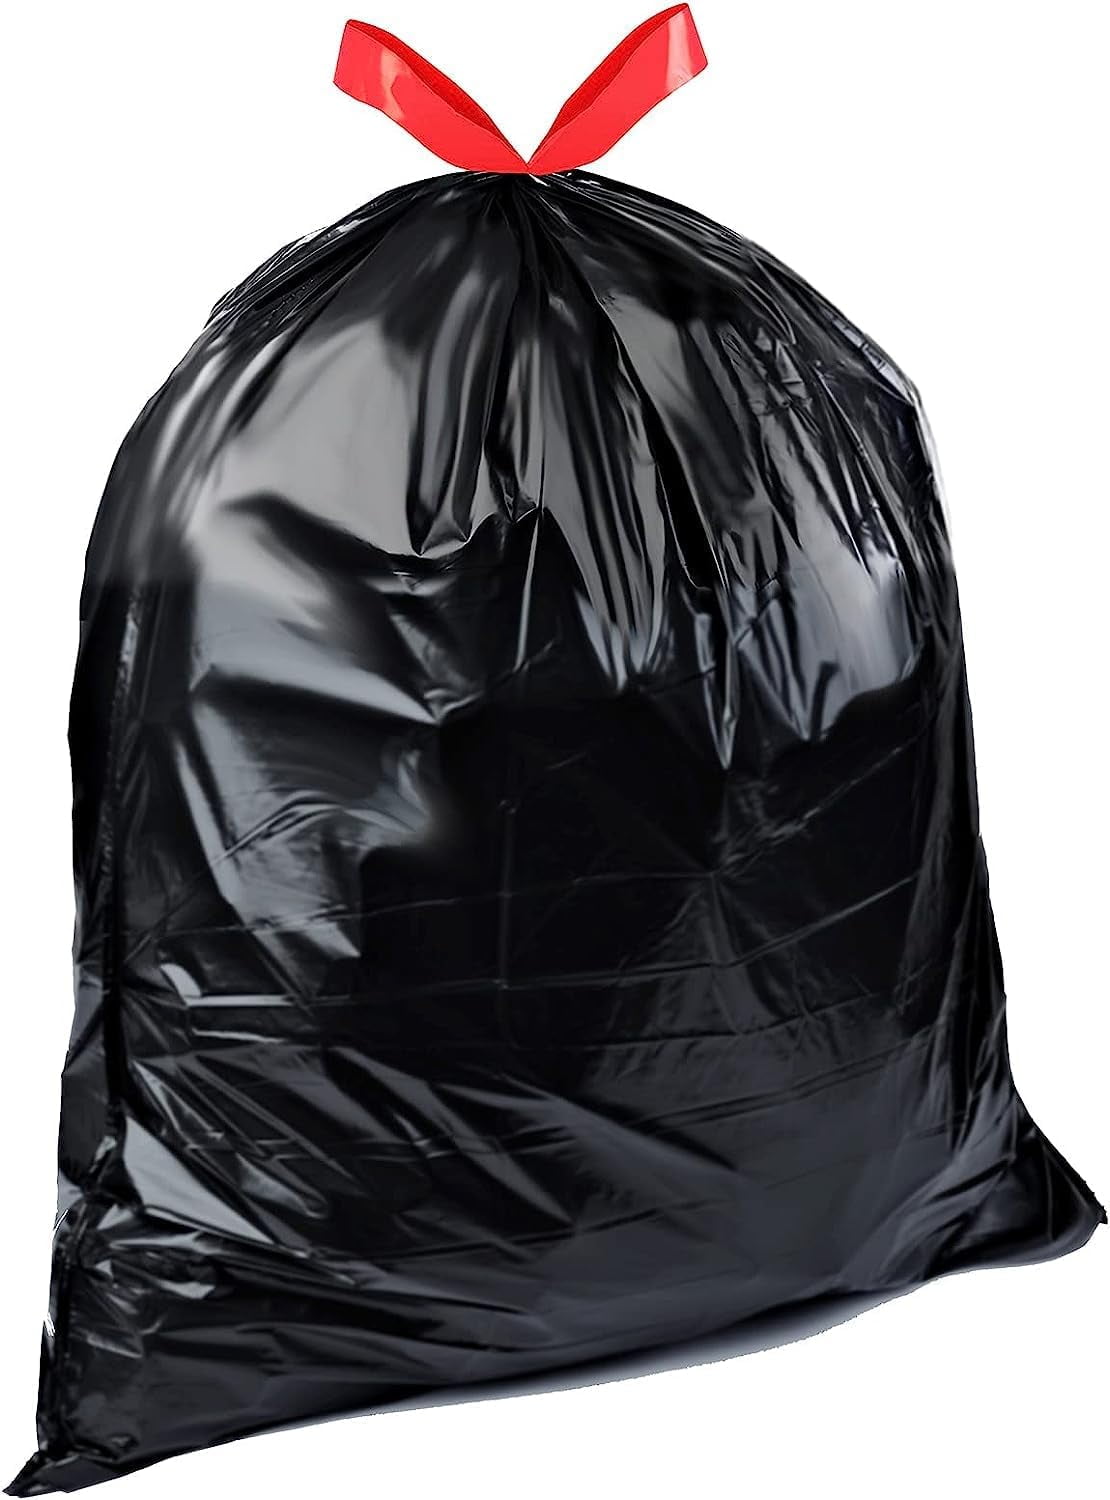 Tasker 40-45 Gallon Trash Bags, (50 Bags w/Ties) Large Black Heavy Duty  Garbage Bags - which also fit 39 Gallon - 40 Gallon - 42 Gallon - 44 Gallon  